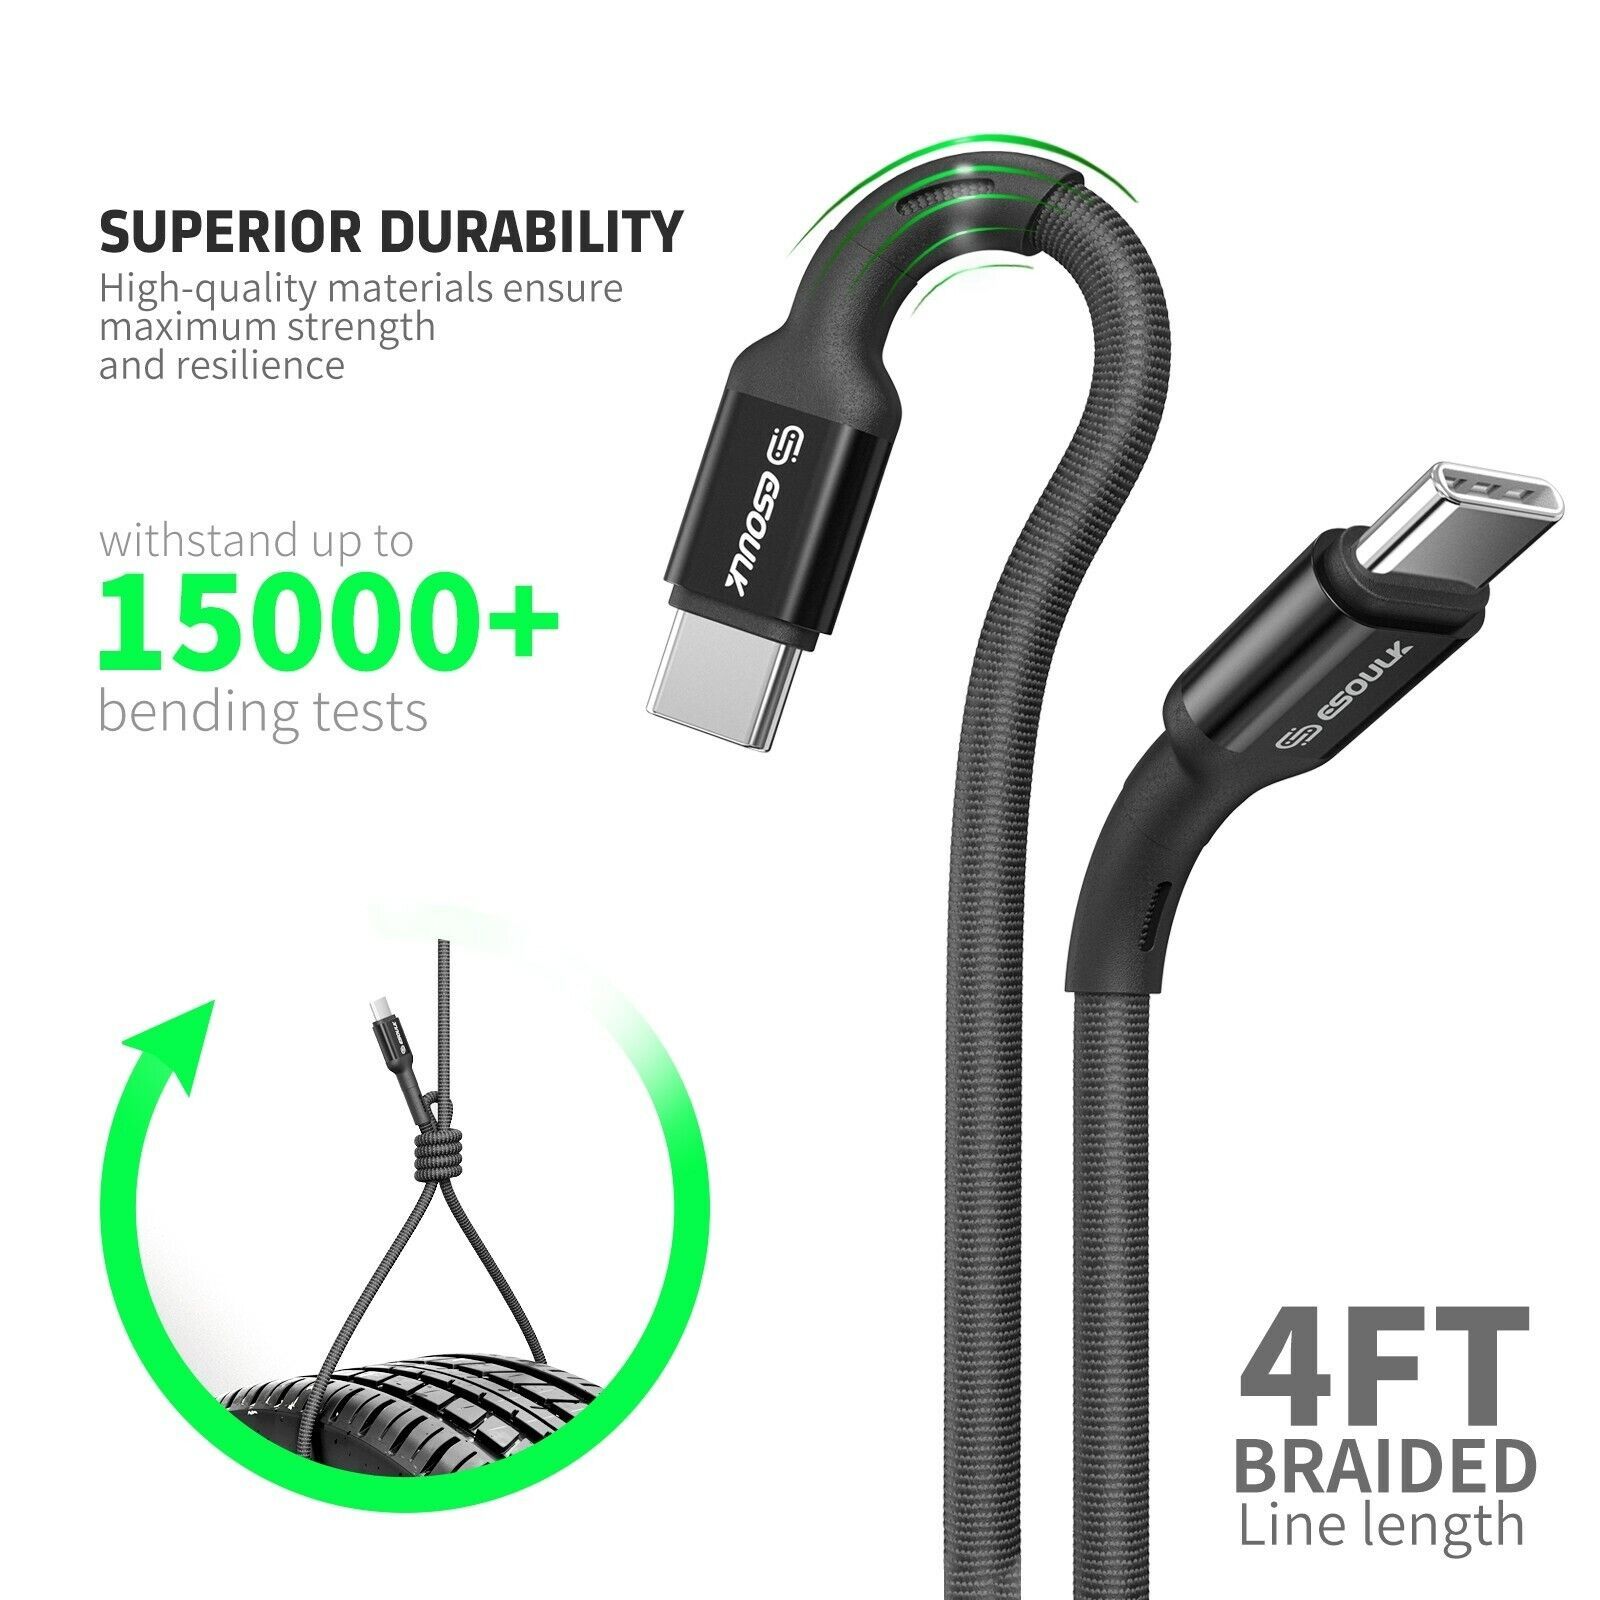 4FT Type C to C Fast Charge Cable For LG K51 / LG Reflect L555DL - $9.85